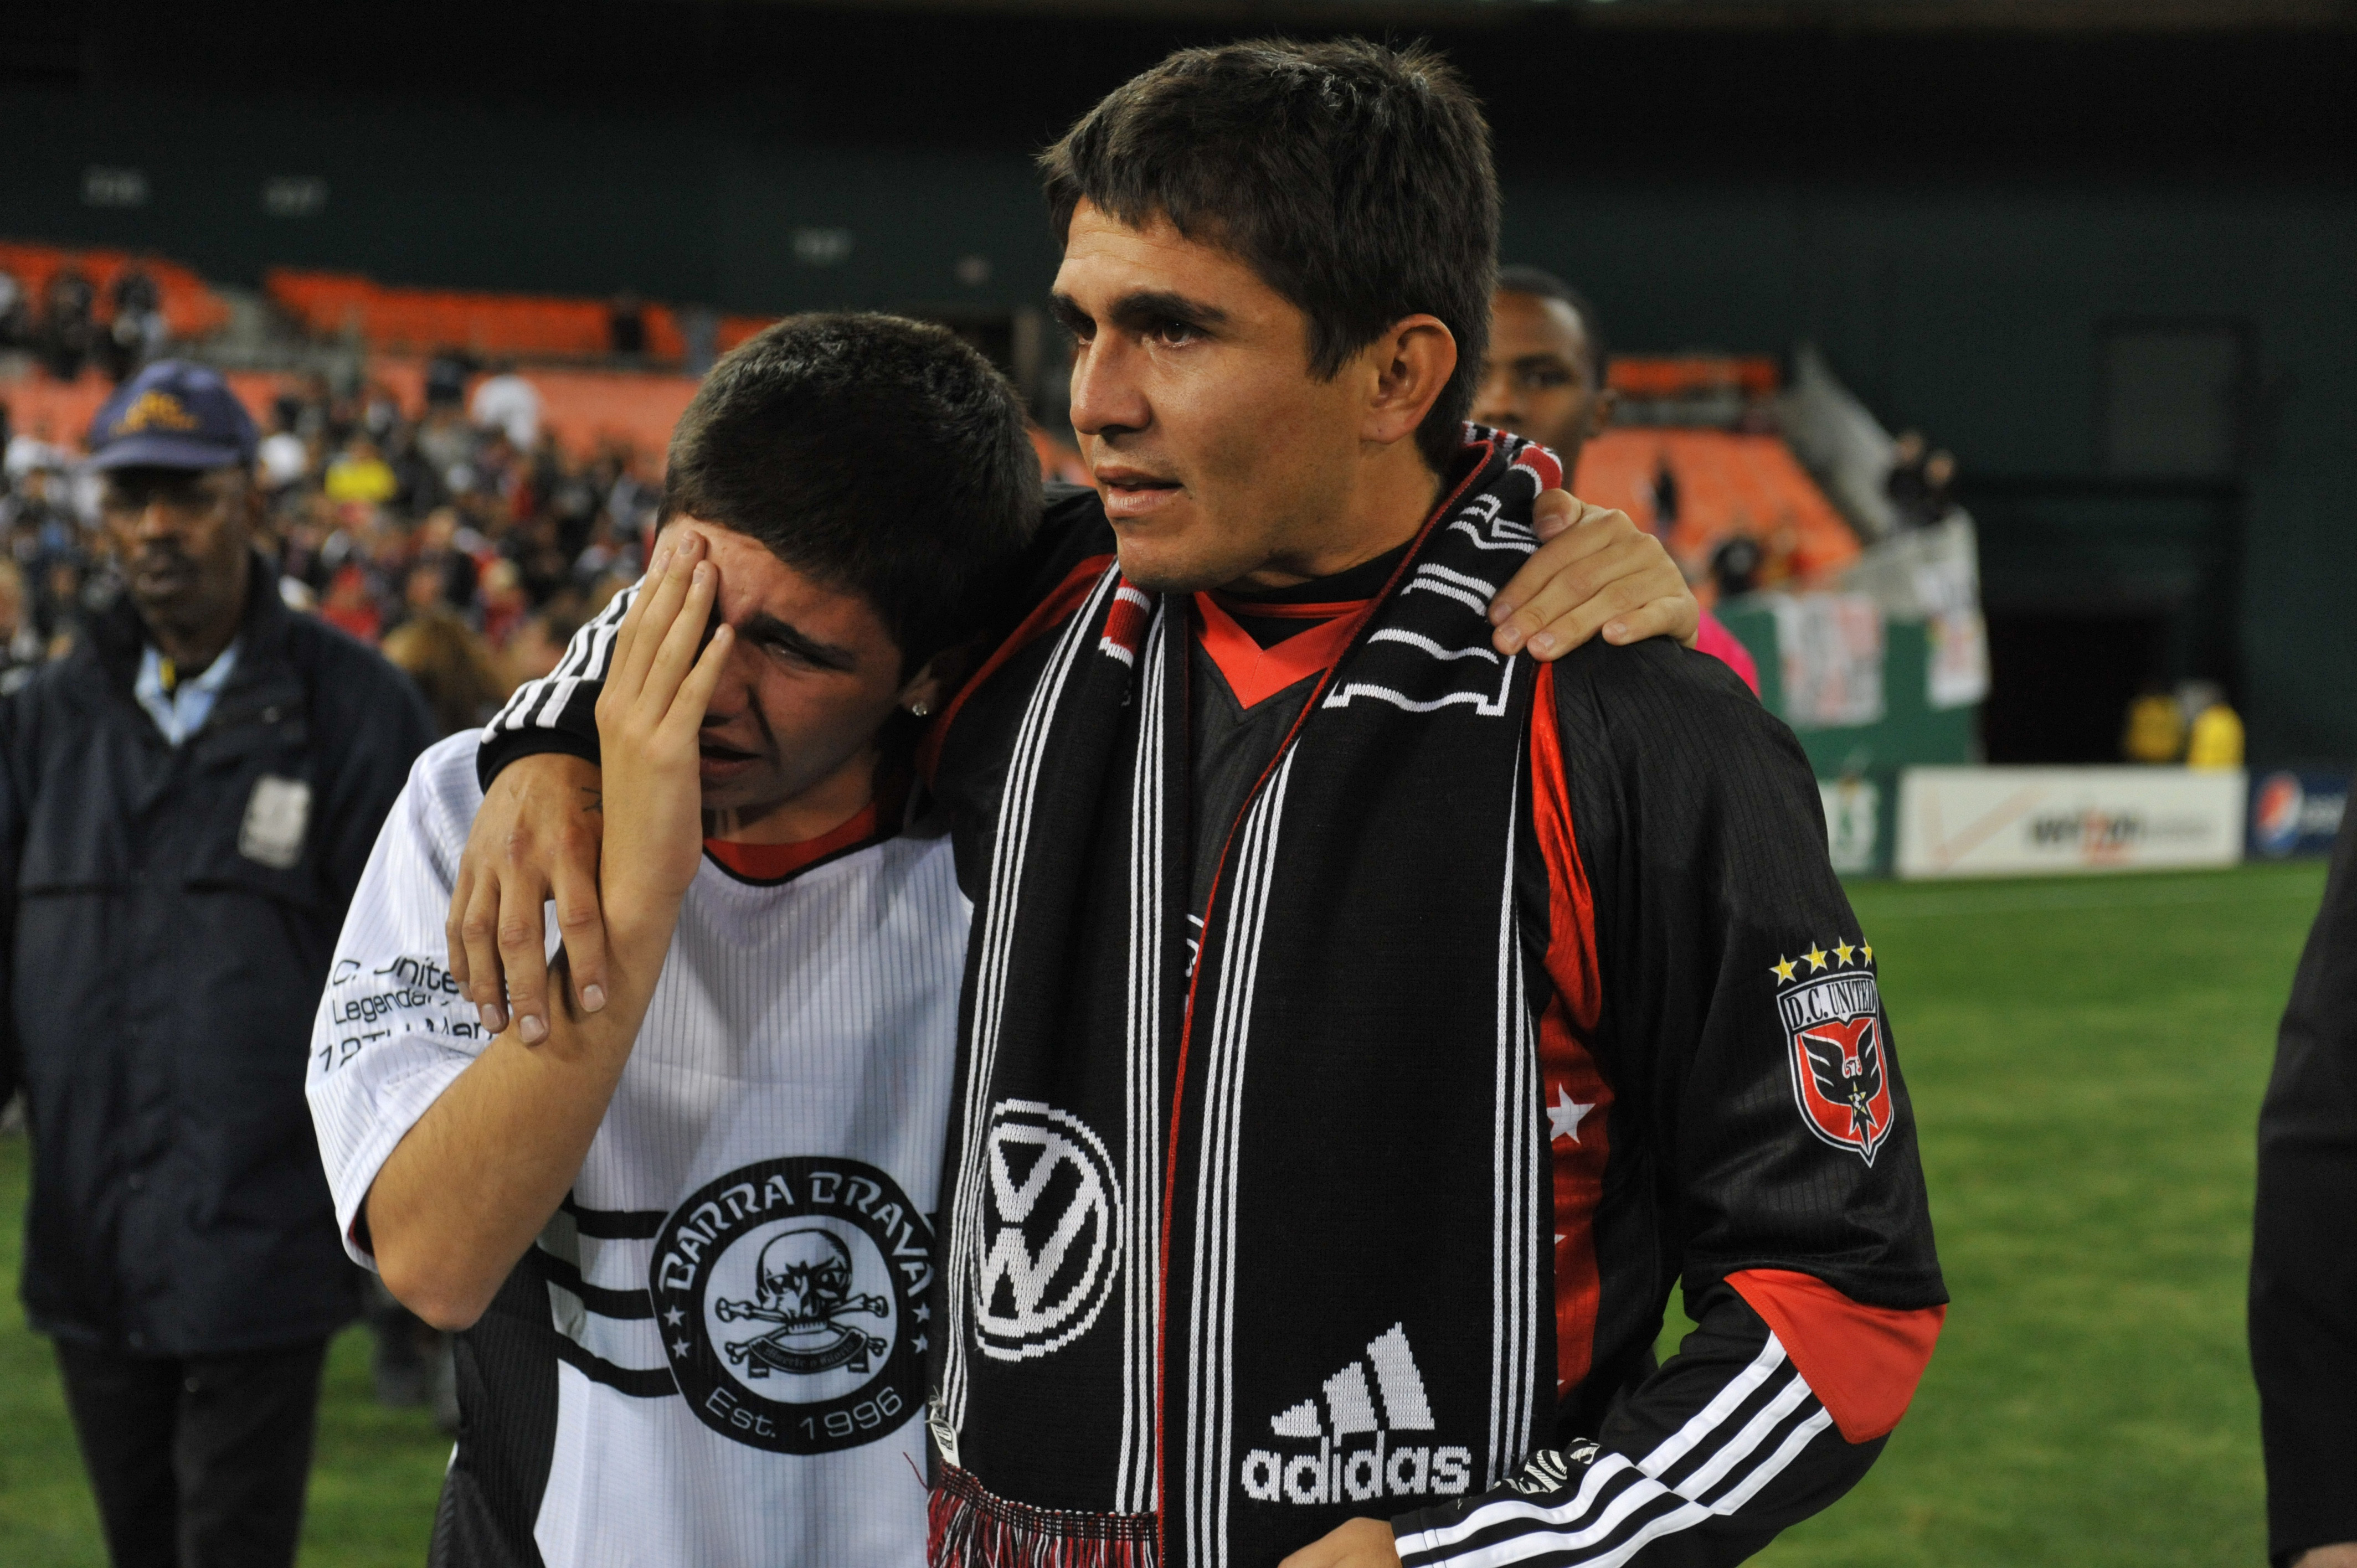 WASHINGTON, DC - OCTOBER 23:  Jaime Moreno #99 of D.C. United walks off the field with his son, James, after the game against Toronto FC at RFK Stadium on October 23, 2010 in Washington, DC. Toronto defeated DC 3-2. (Photo by Larry French/Getty Images)